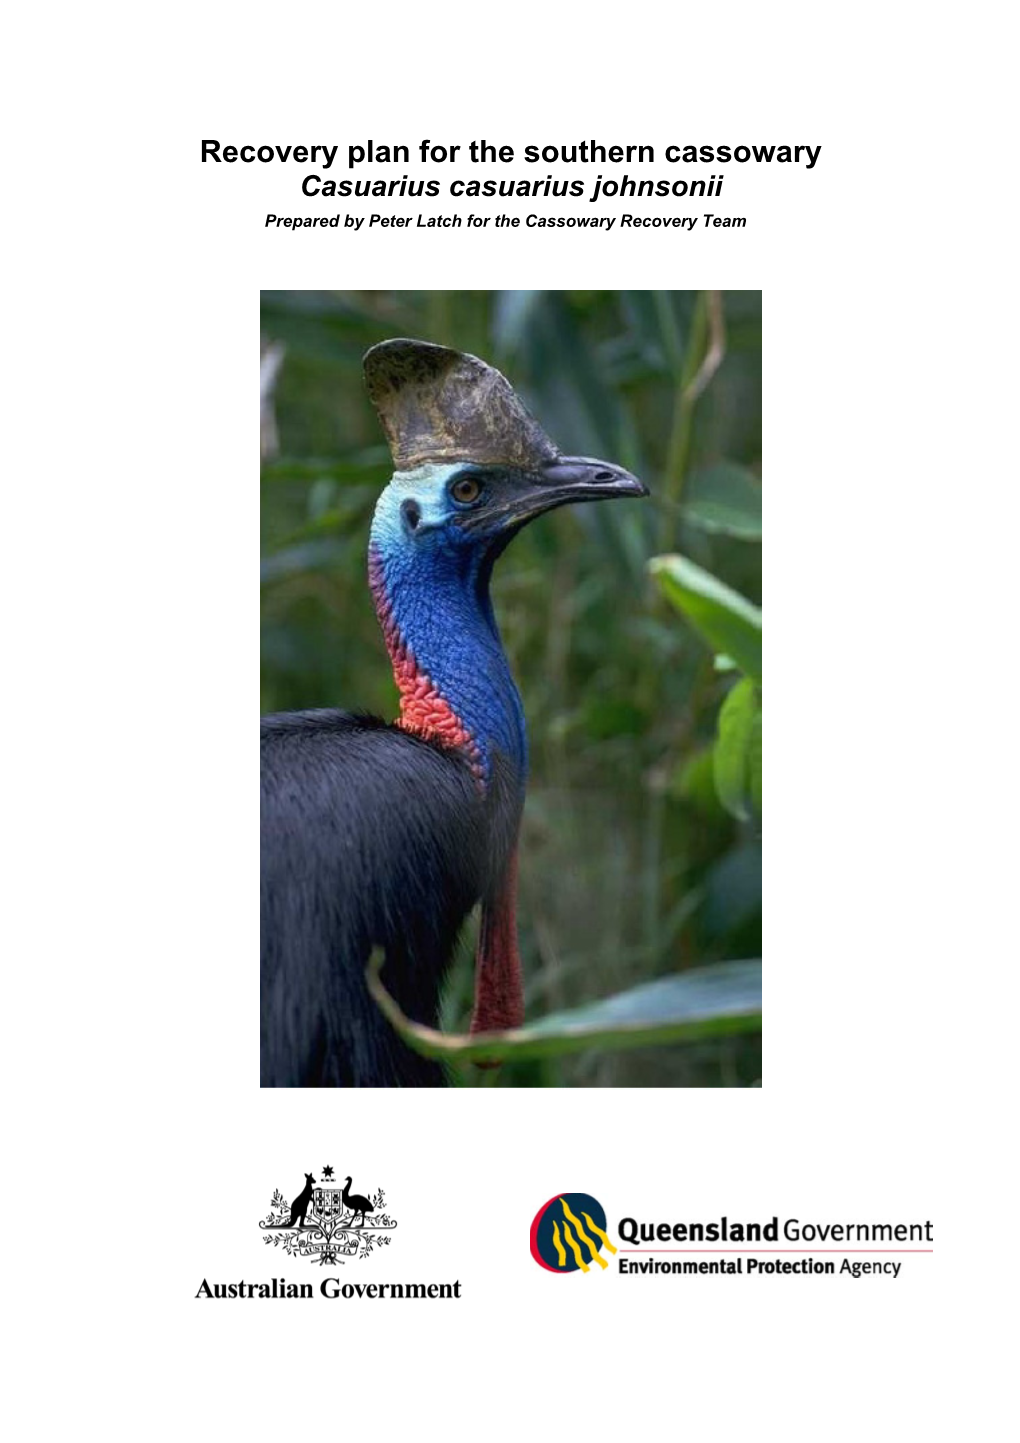 Recovery Plan for the Southern Cassowary Casuarius Casuarius Johnsonii Prepared by Peter Latch for the Cassowary Recovery Team